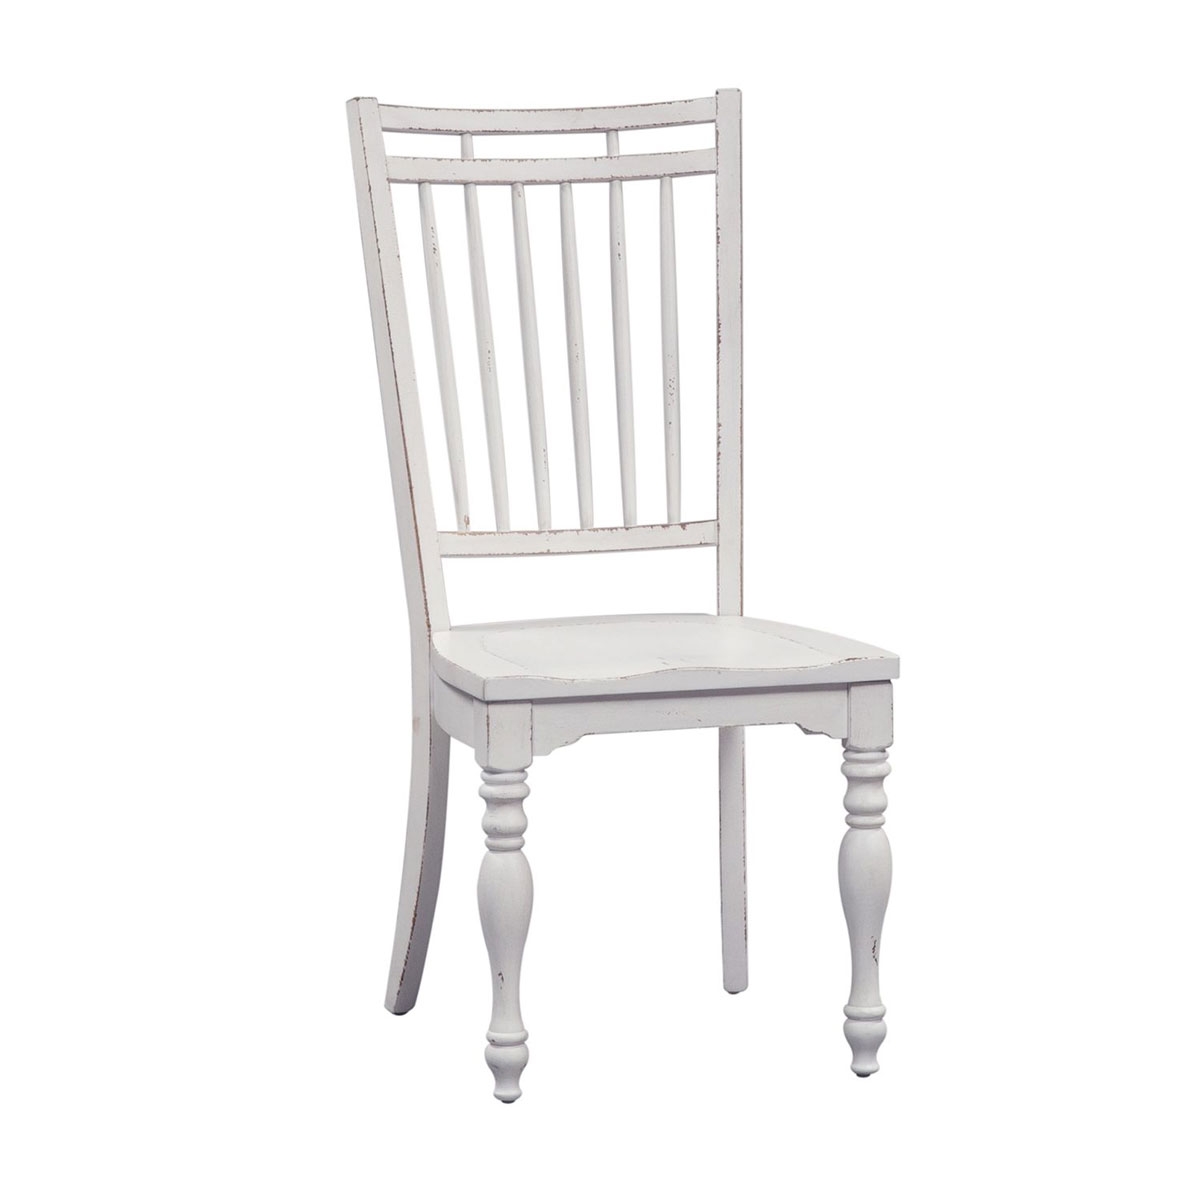 Picture of OLYMPIA SPINDLE BACK CHAIR